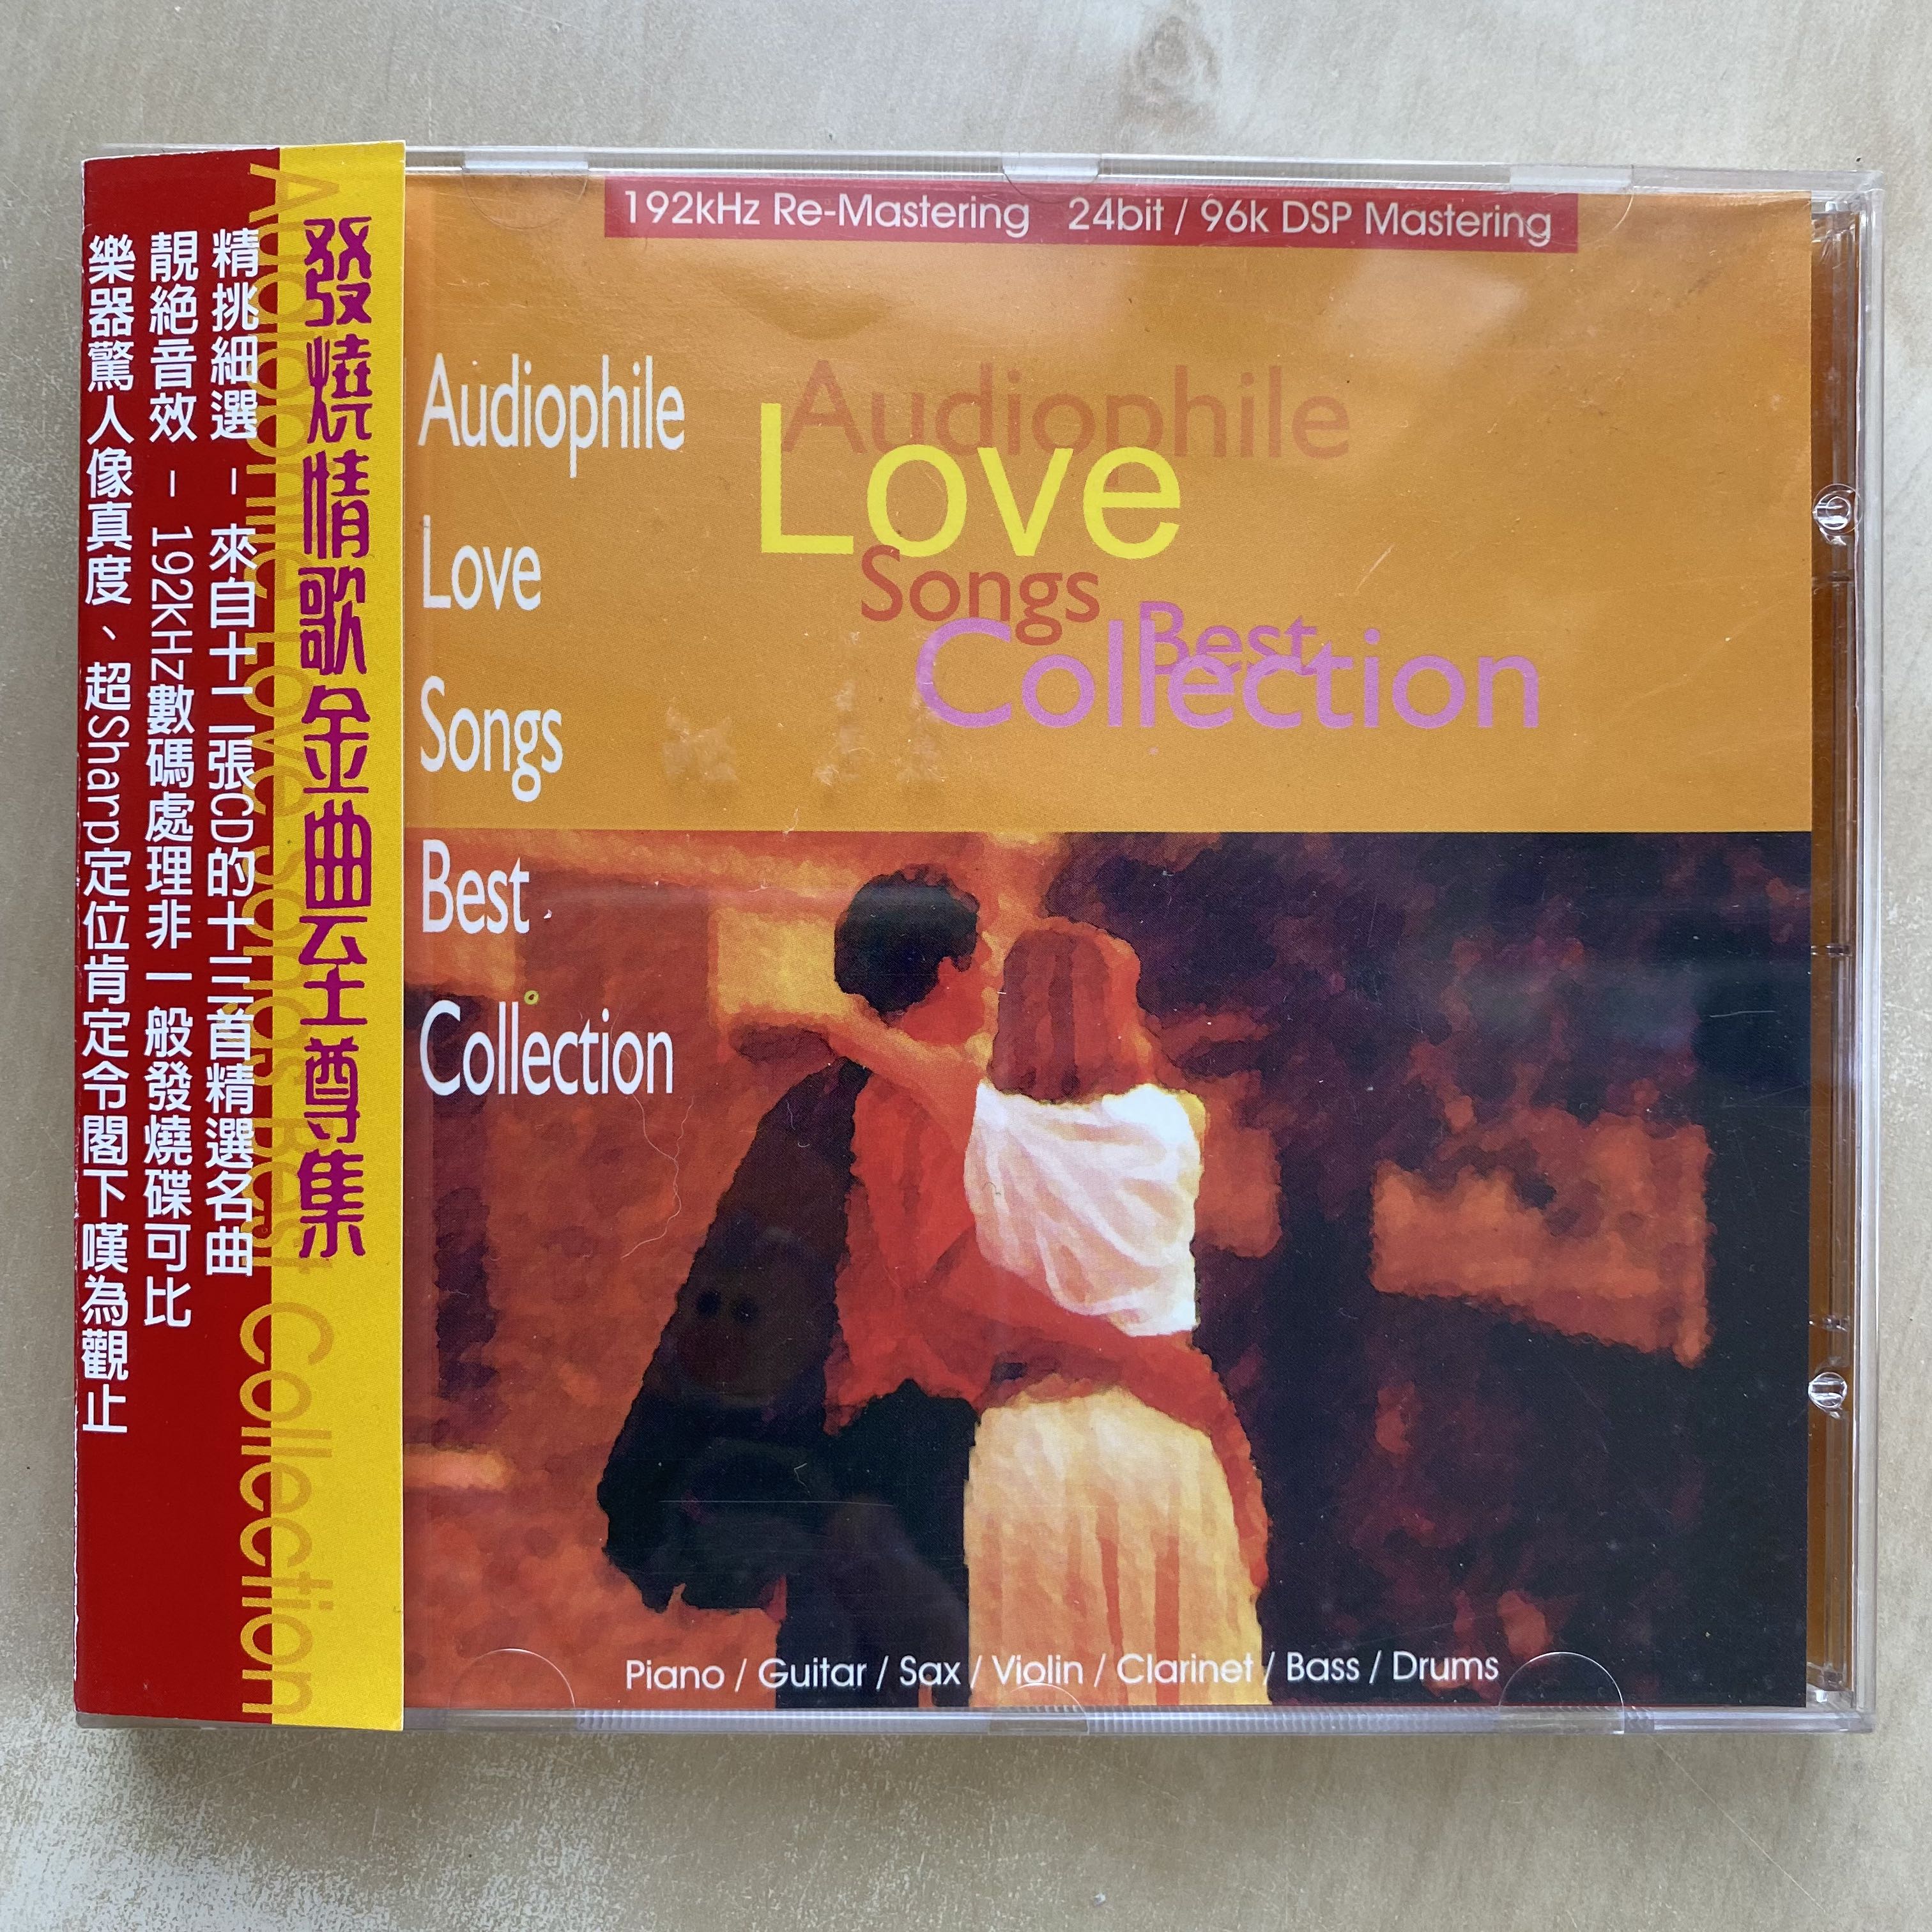 CD丨Audiophile Love Songs Best Collection, 興趣及遊戲, 音樂 